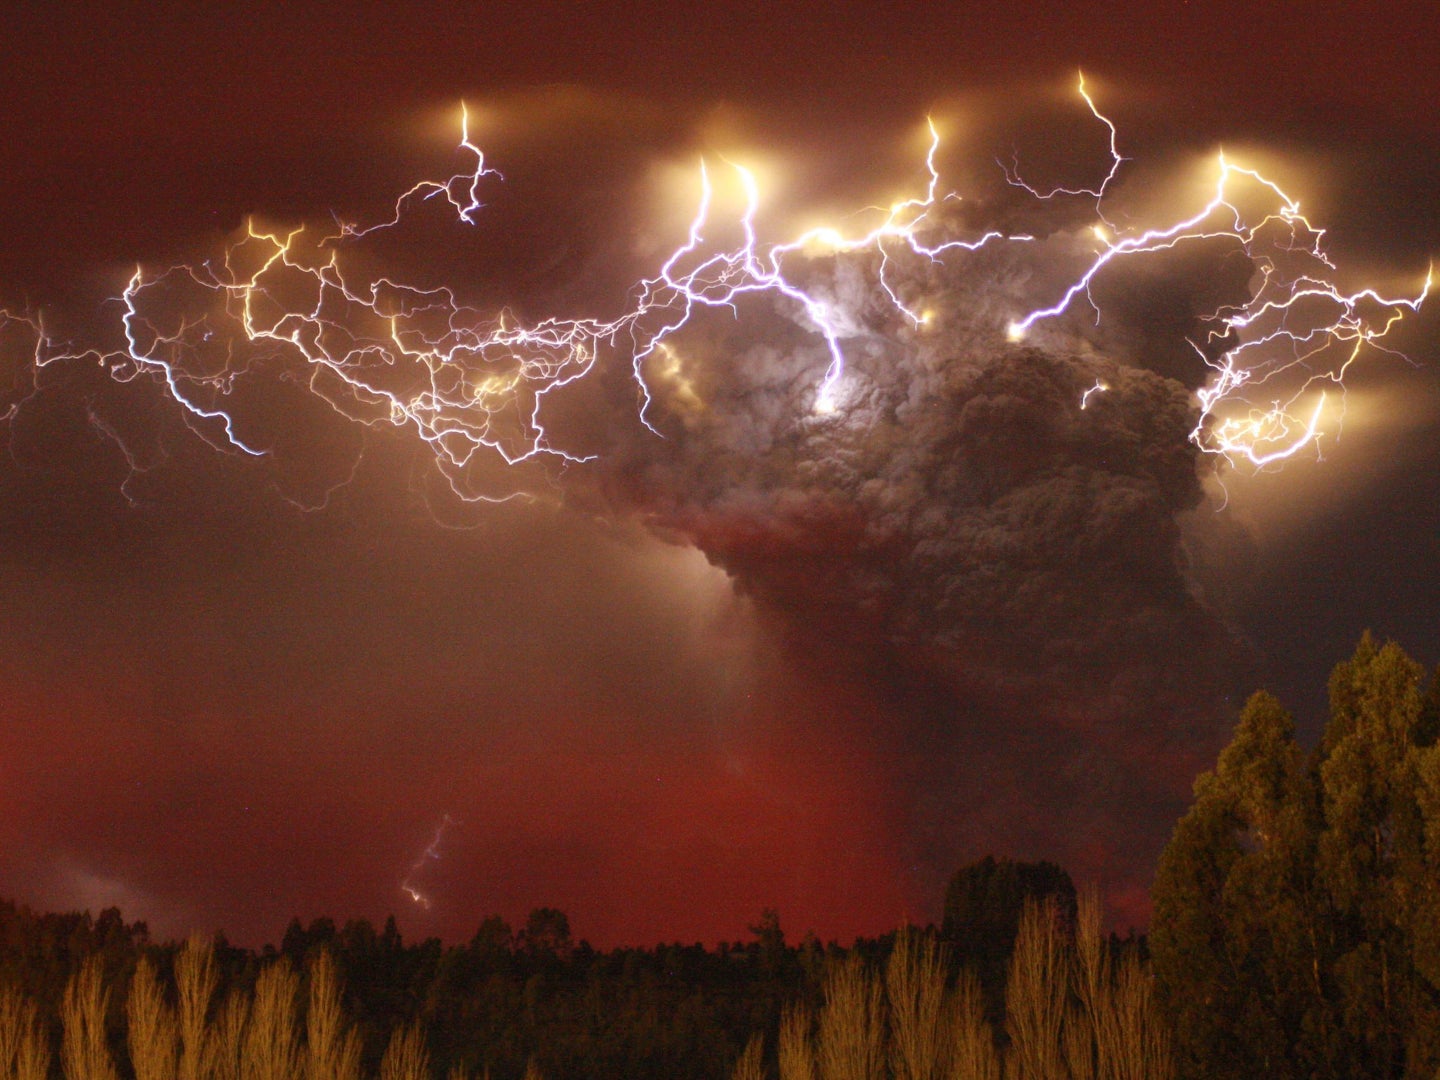 Lightning flashes around the ash plume above the Puyehue-Cordon Caulle volcano chain near Entrelagos on June 5, 2011.